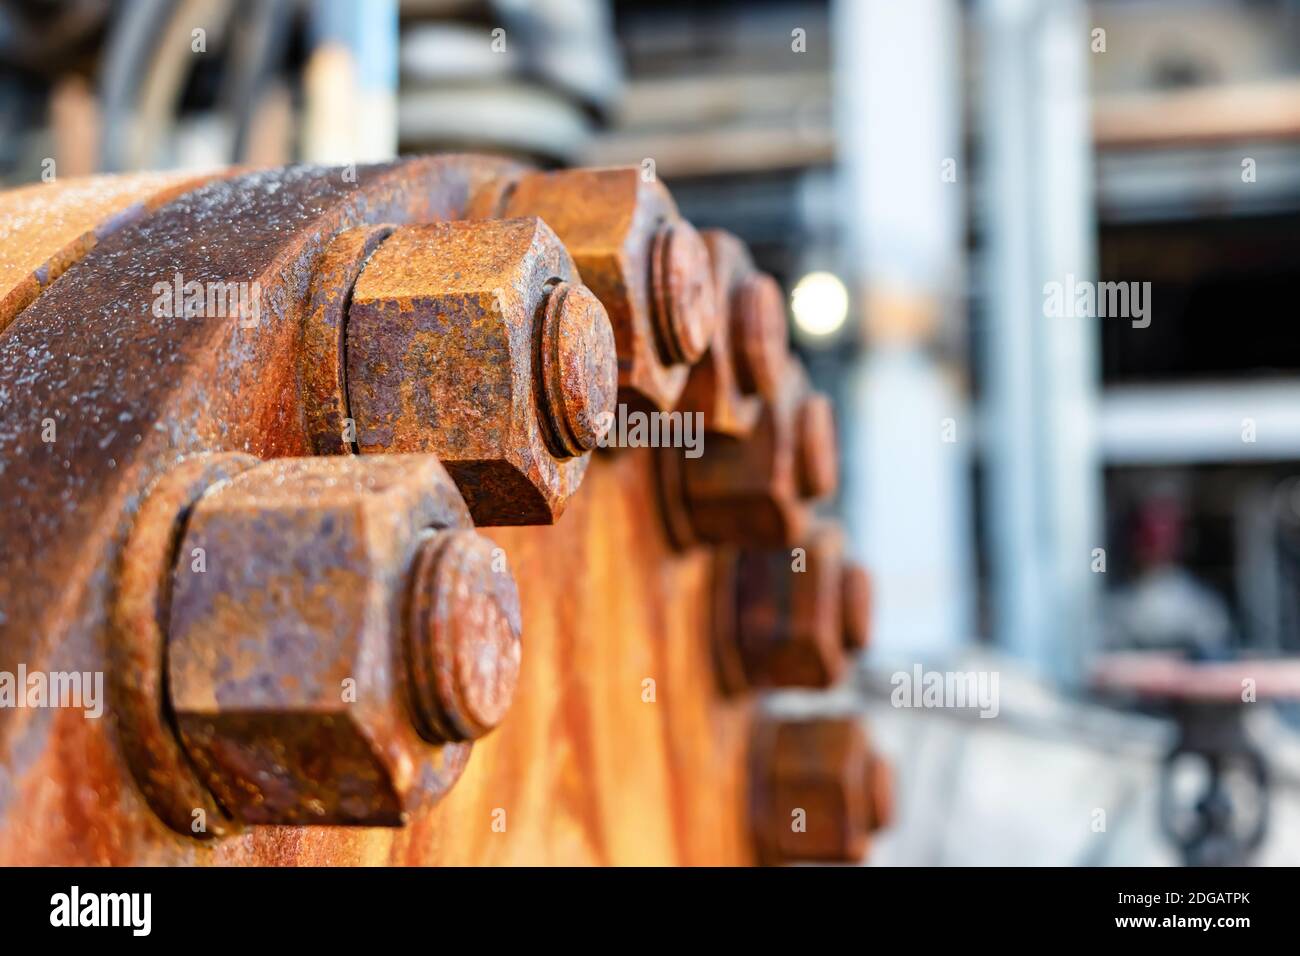 The cover of the old rusty heat exchanger covered with the same rusty bolts and nuts Stock Photo